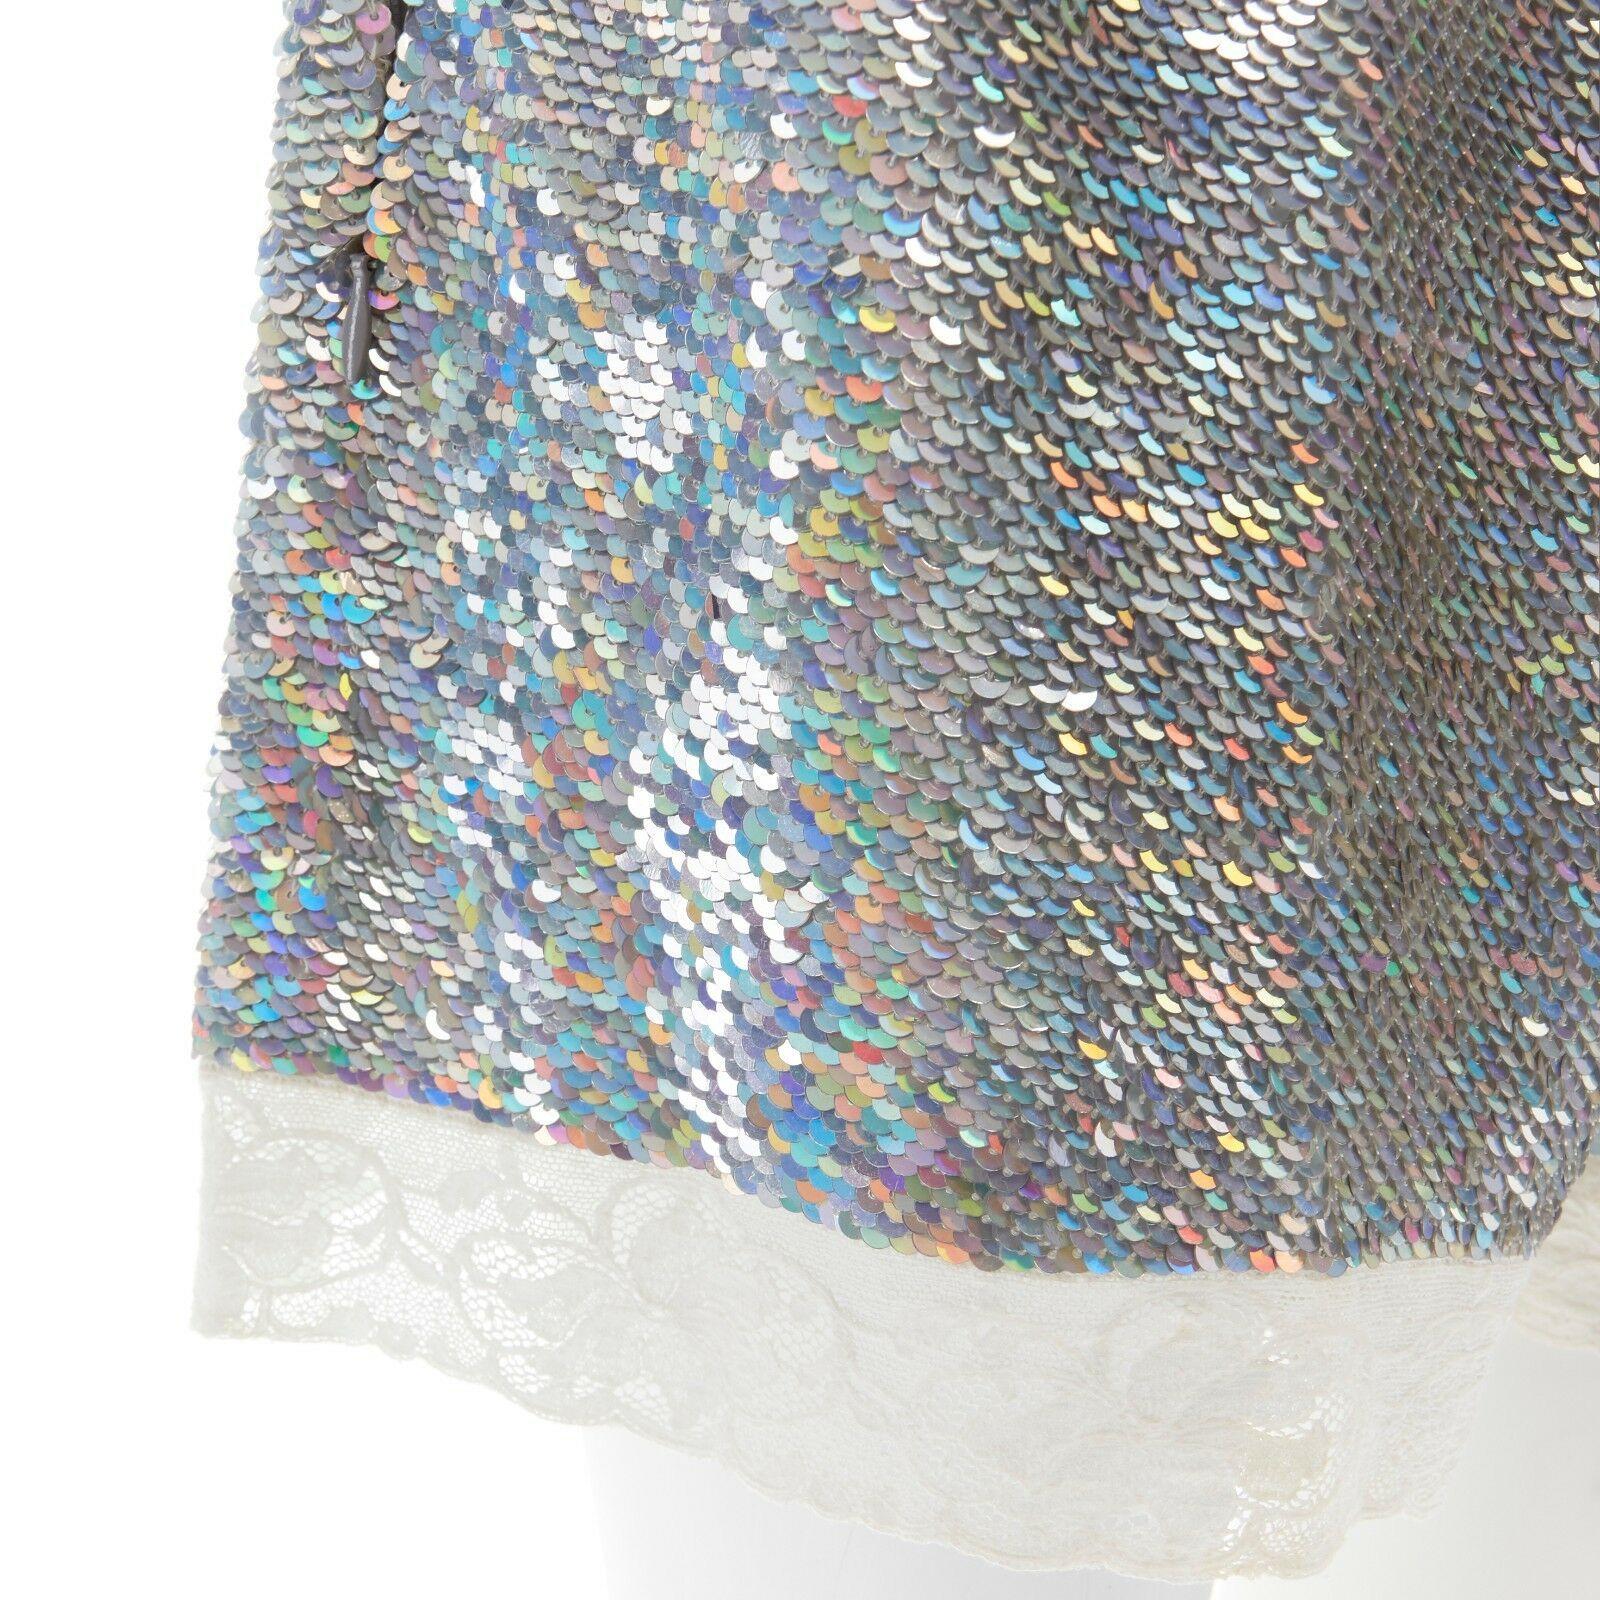 ASHISH silver iridescent sequins white lace hem drawstring cotton shorts XS

ASHISH
Iridescent silver sequins embellishment. White floral lace trimmed hem. Dual zip side pocket. Elasticated drawstring waistband. Cotton shorts. Made in